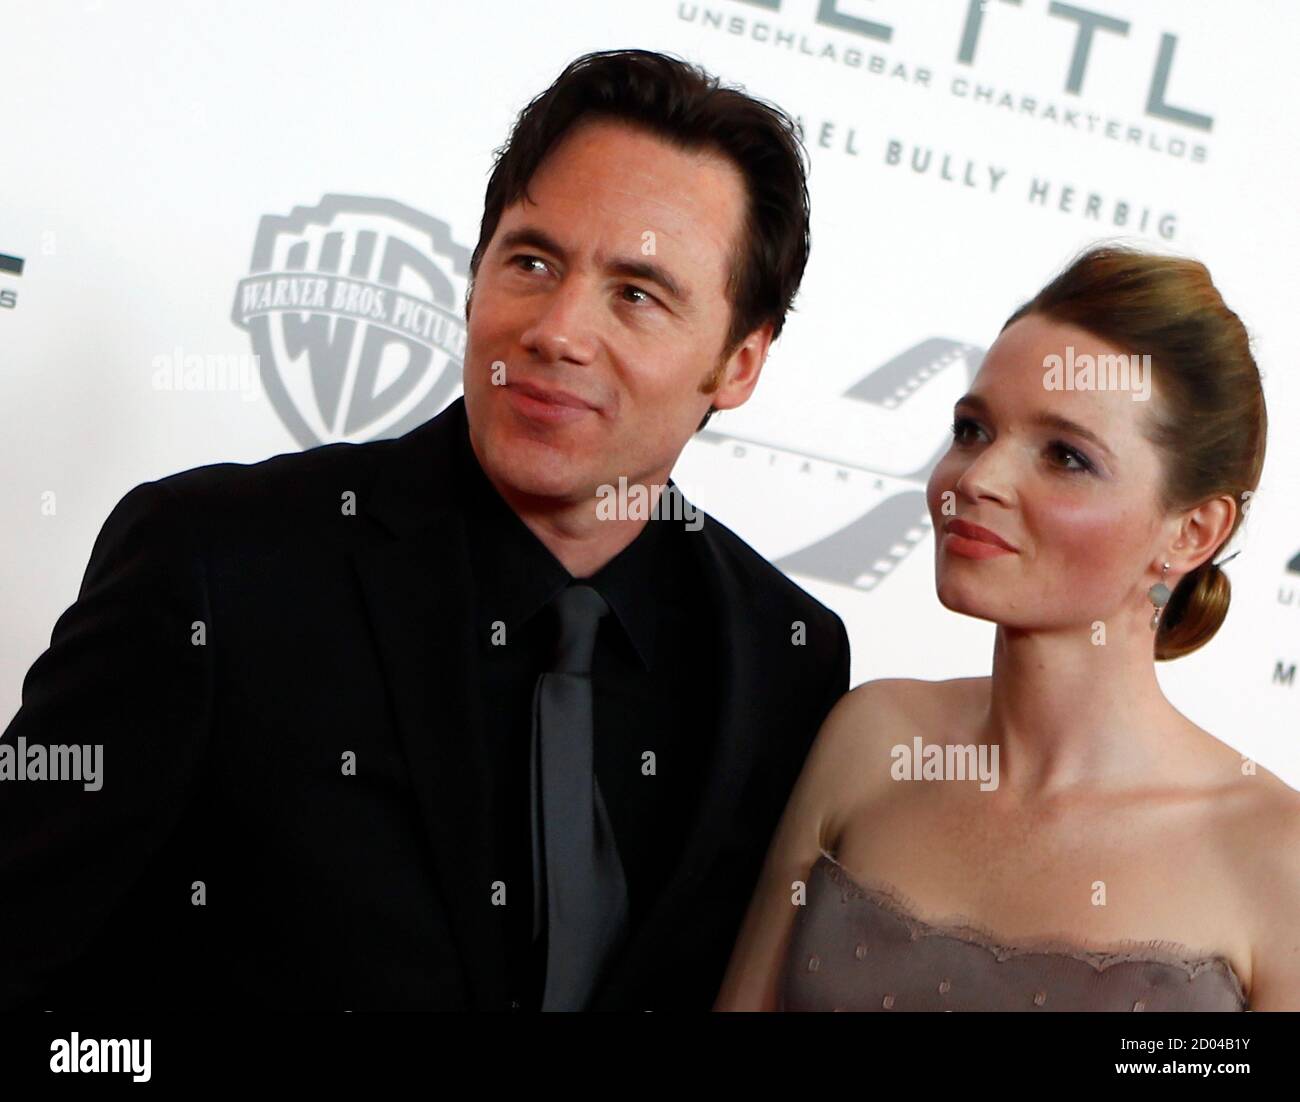 Actor Michael 'Bully' Herbig and actress Karoline Herfurth arrive on the red carpet for the screening of German director Helmut Dietl's movie 'Zettl' in Munich January 31, 2012.   REUTERS/Michael Dalder  (GERMANY - Tags: ENTERTAINMENT) Stock Photo